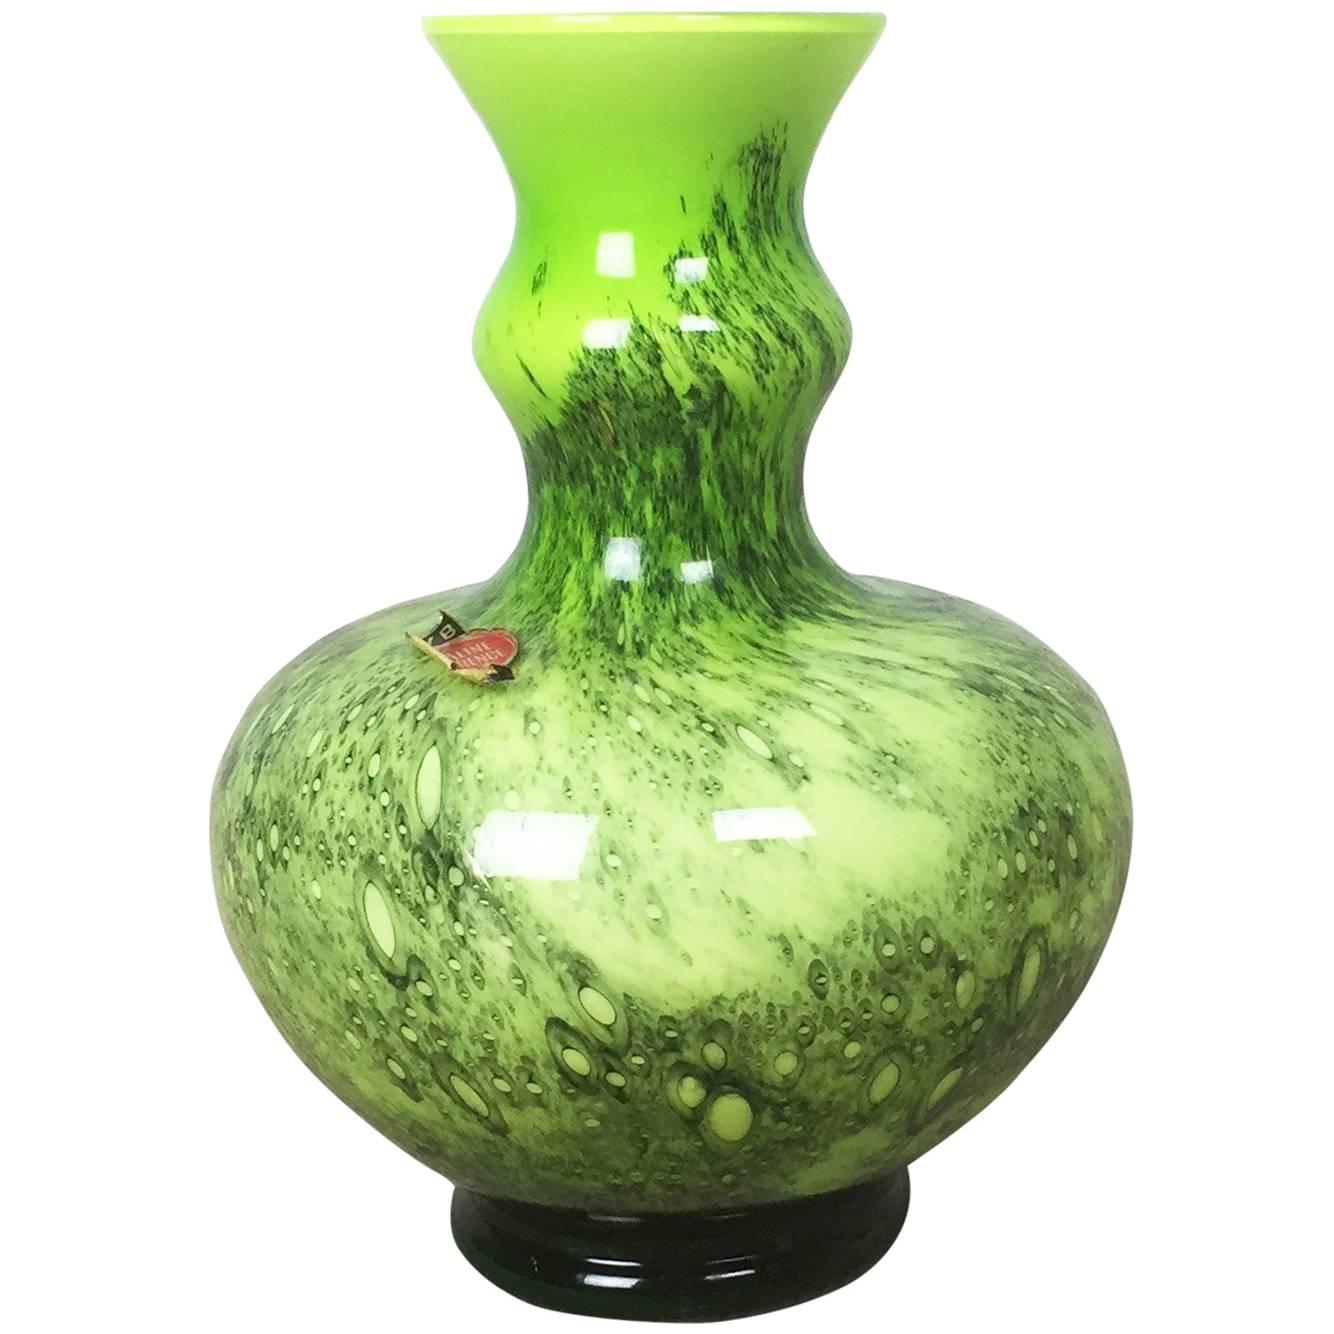 Vintage 1970s Opaline Florence Vase Designed by Carlo Moretti, Italy